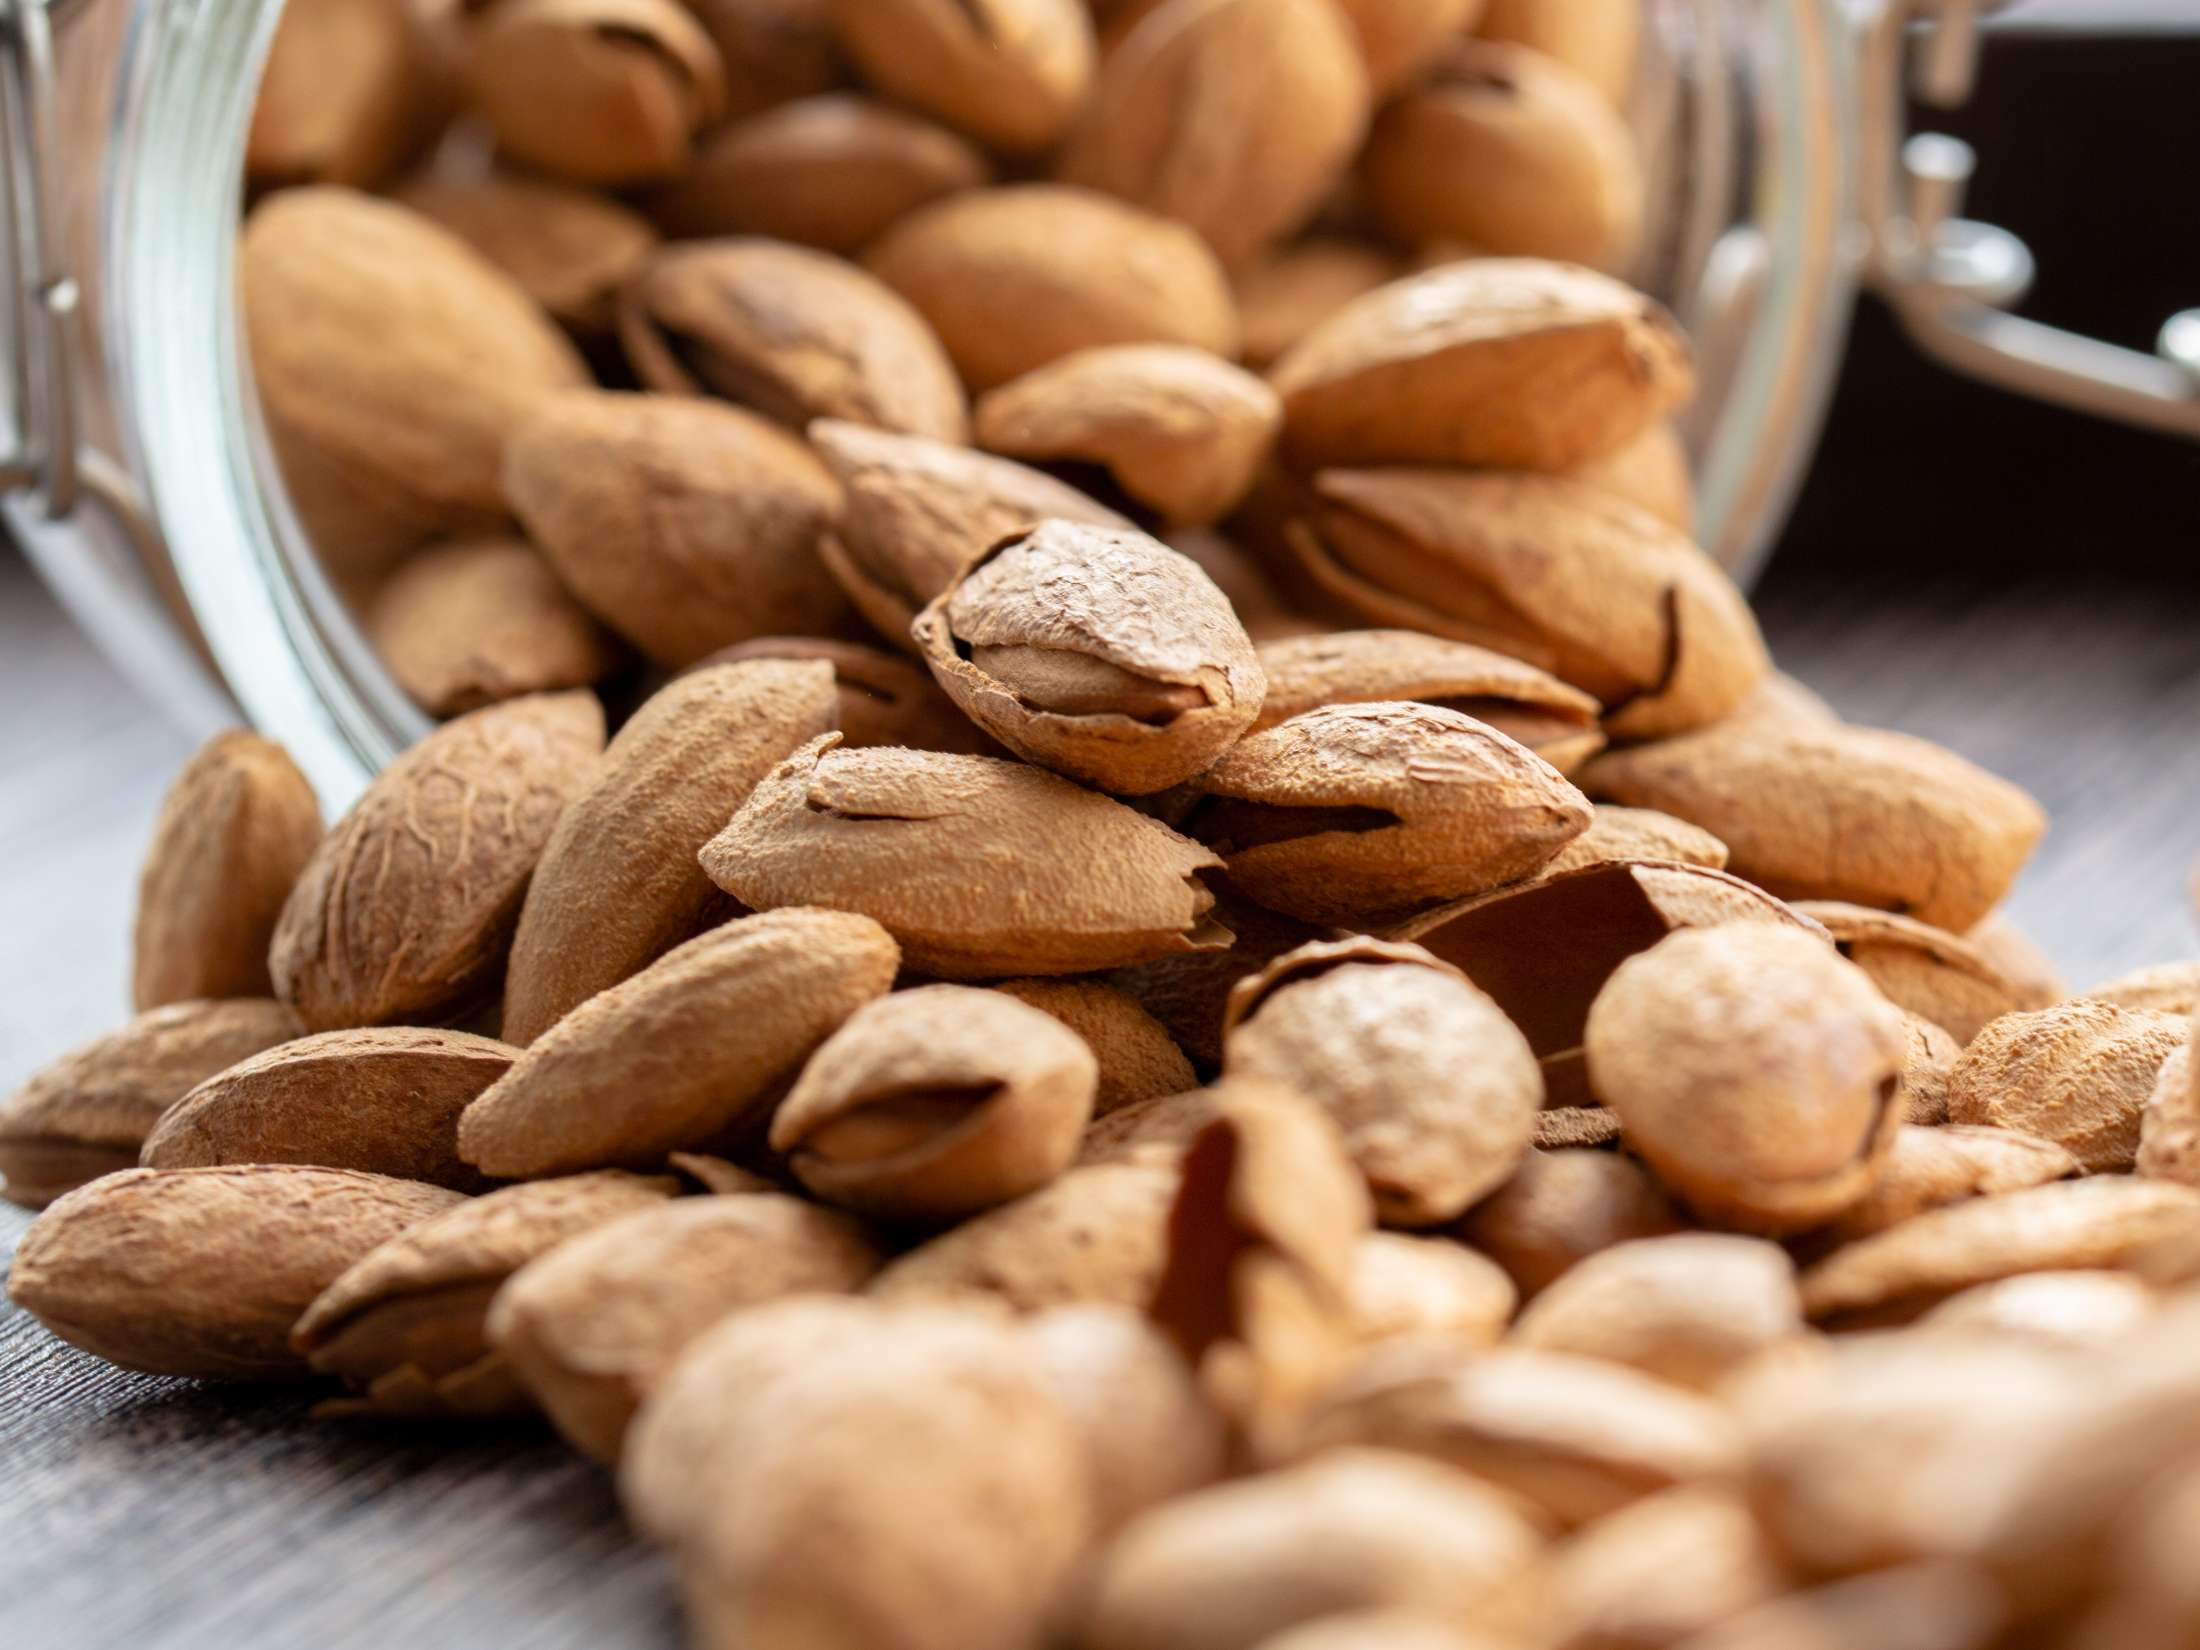 Almonds: Health benefits, nutrition, and risks